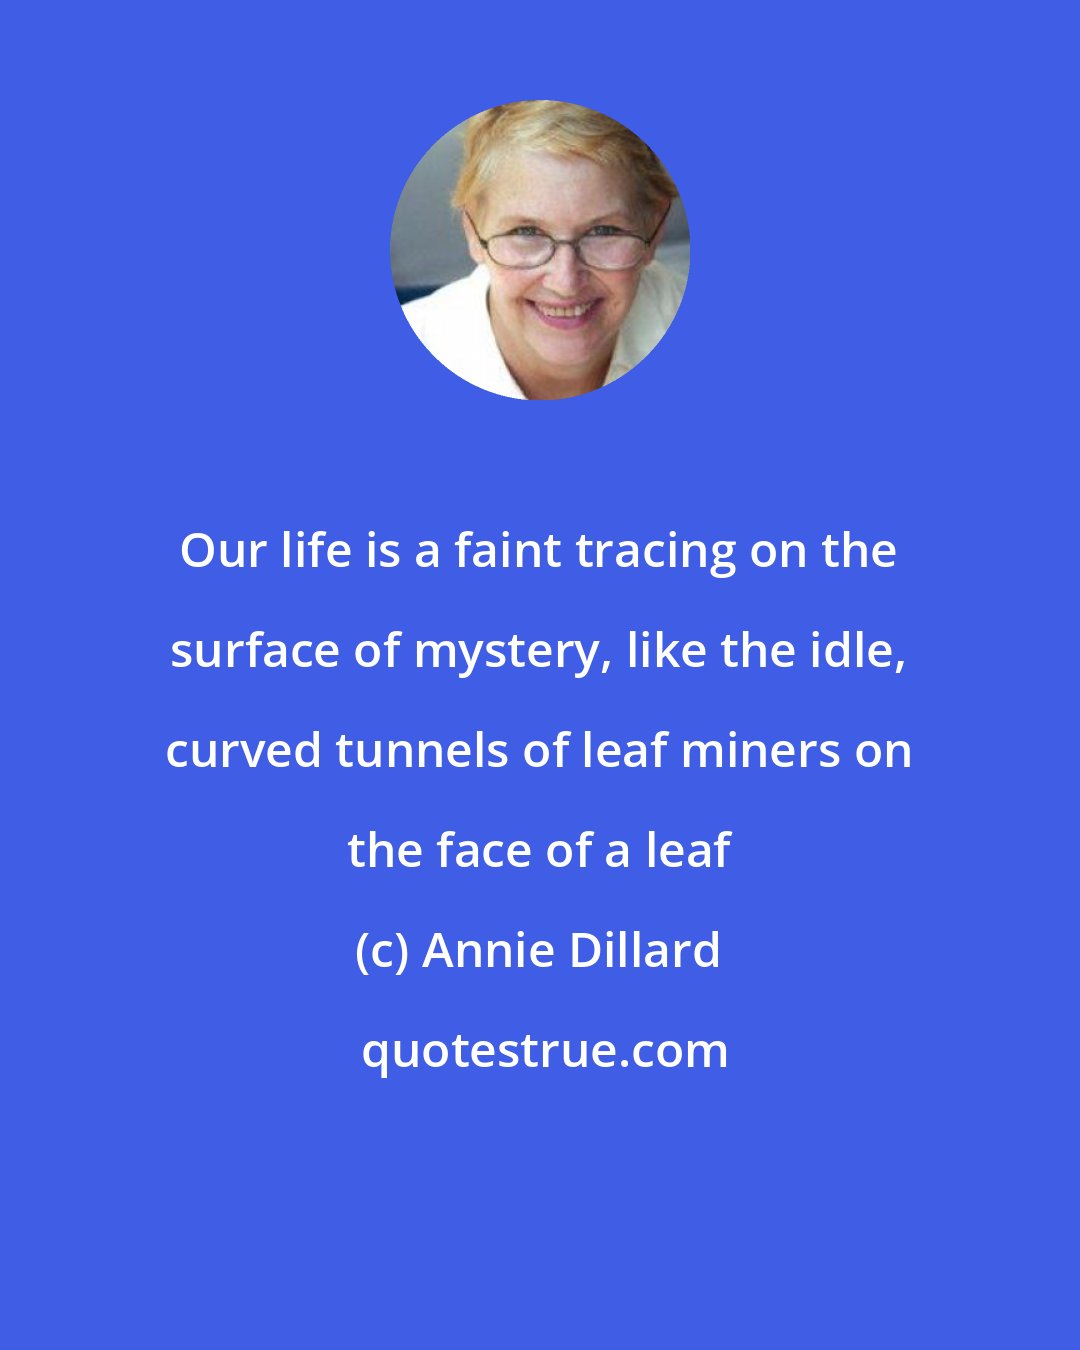 Annie Dillard: Our life is a faint tracing on the surface of mystery, like the idle, curved tunnels of leaf miners on the face of a leaf